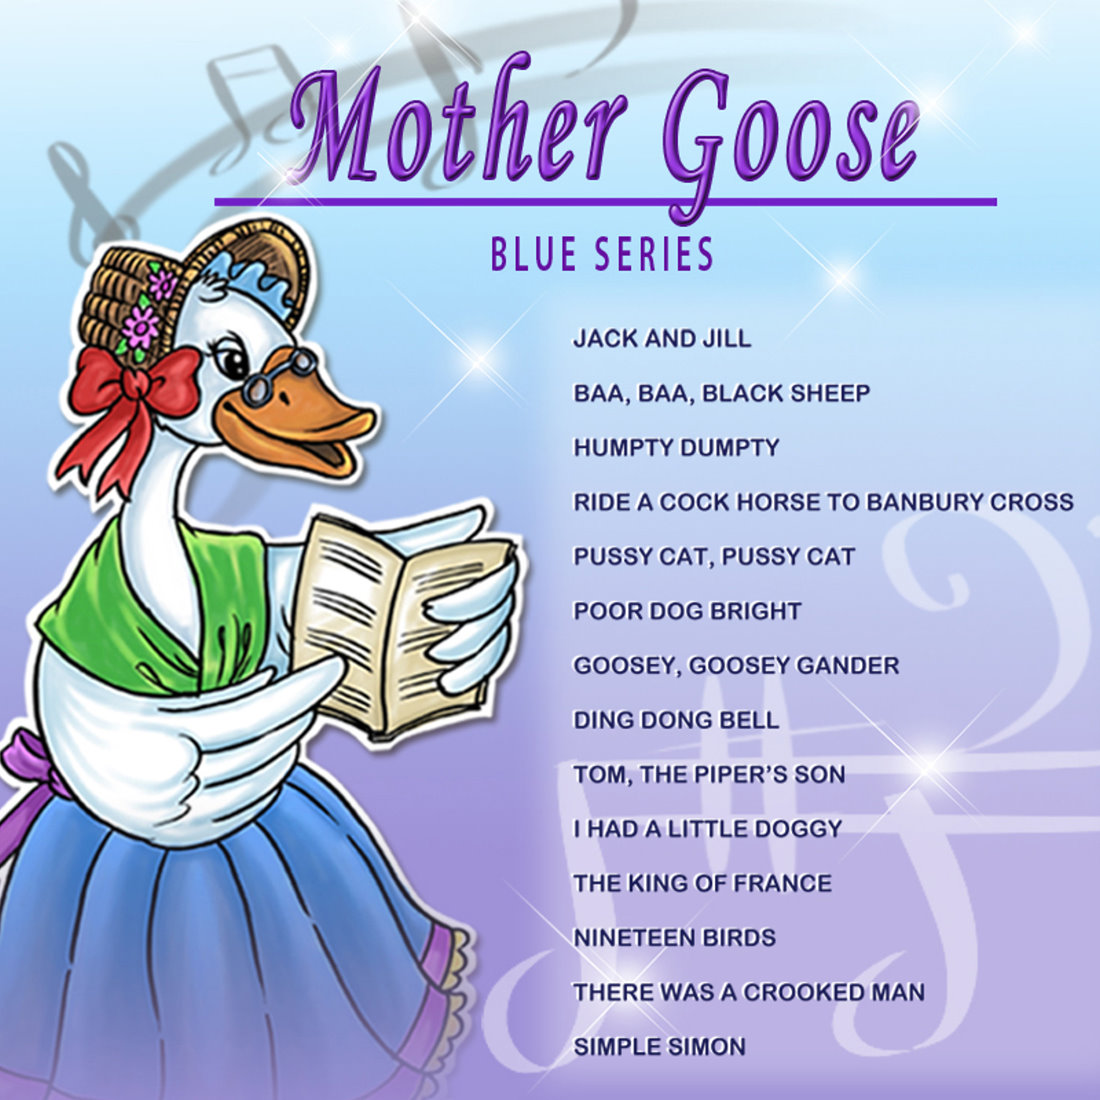 Mother Goose (Blue) - My Kids Songs - CD Disk & MP3 Download